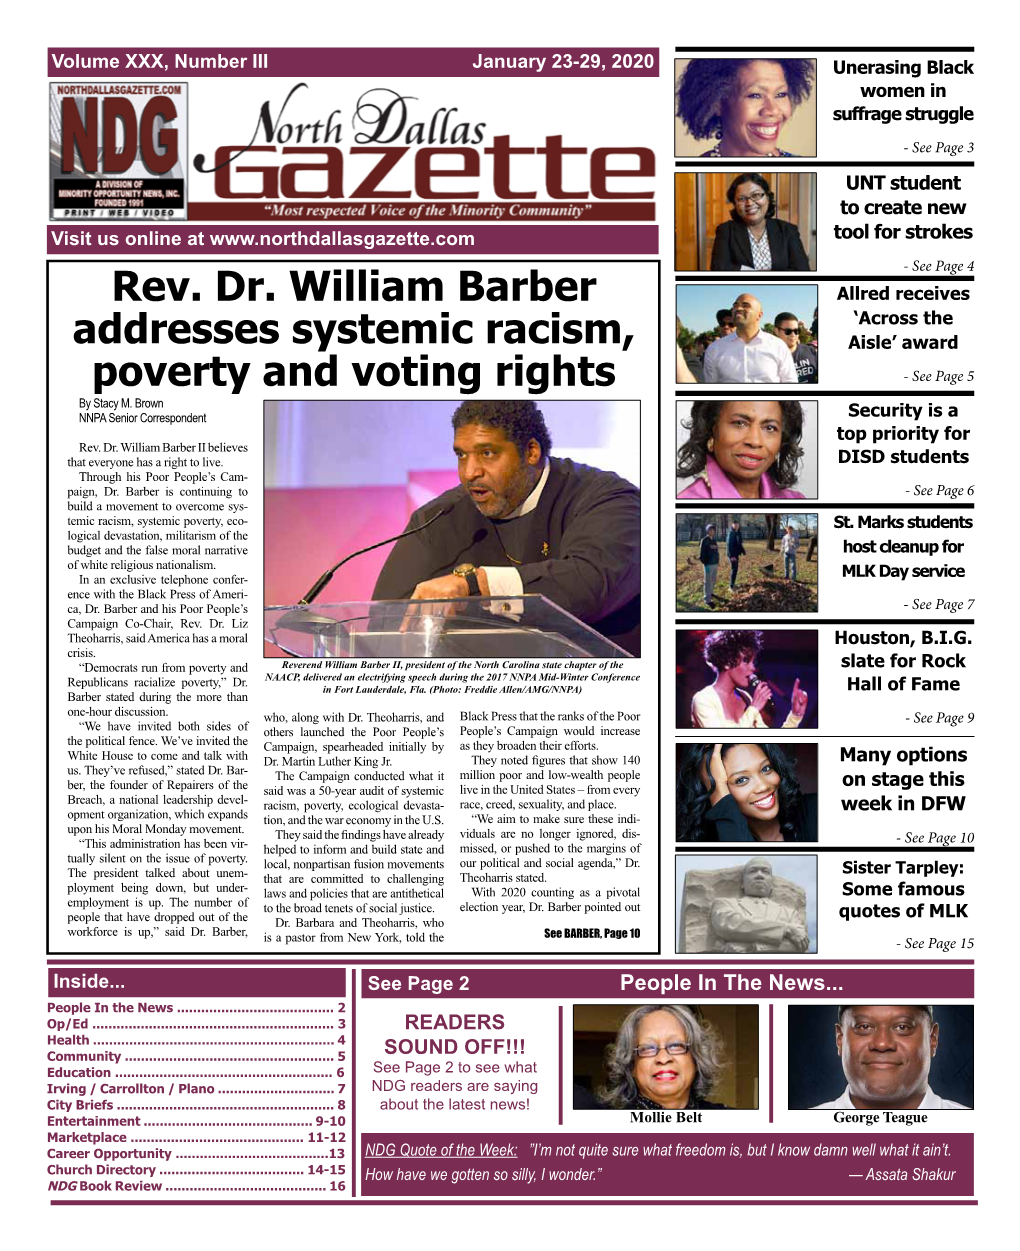 Rev. Dr. William Barber Addresses Systemic Racism, Poverty and Voting